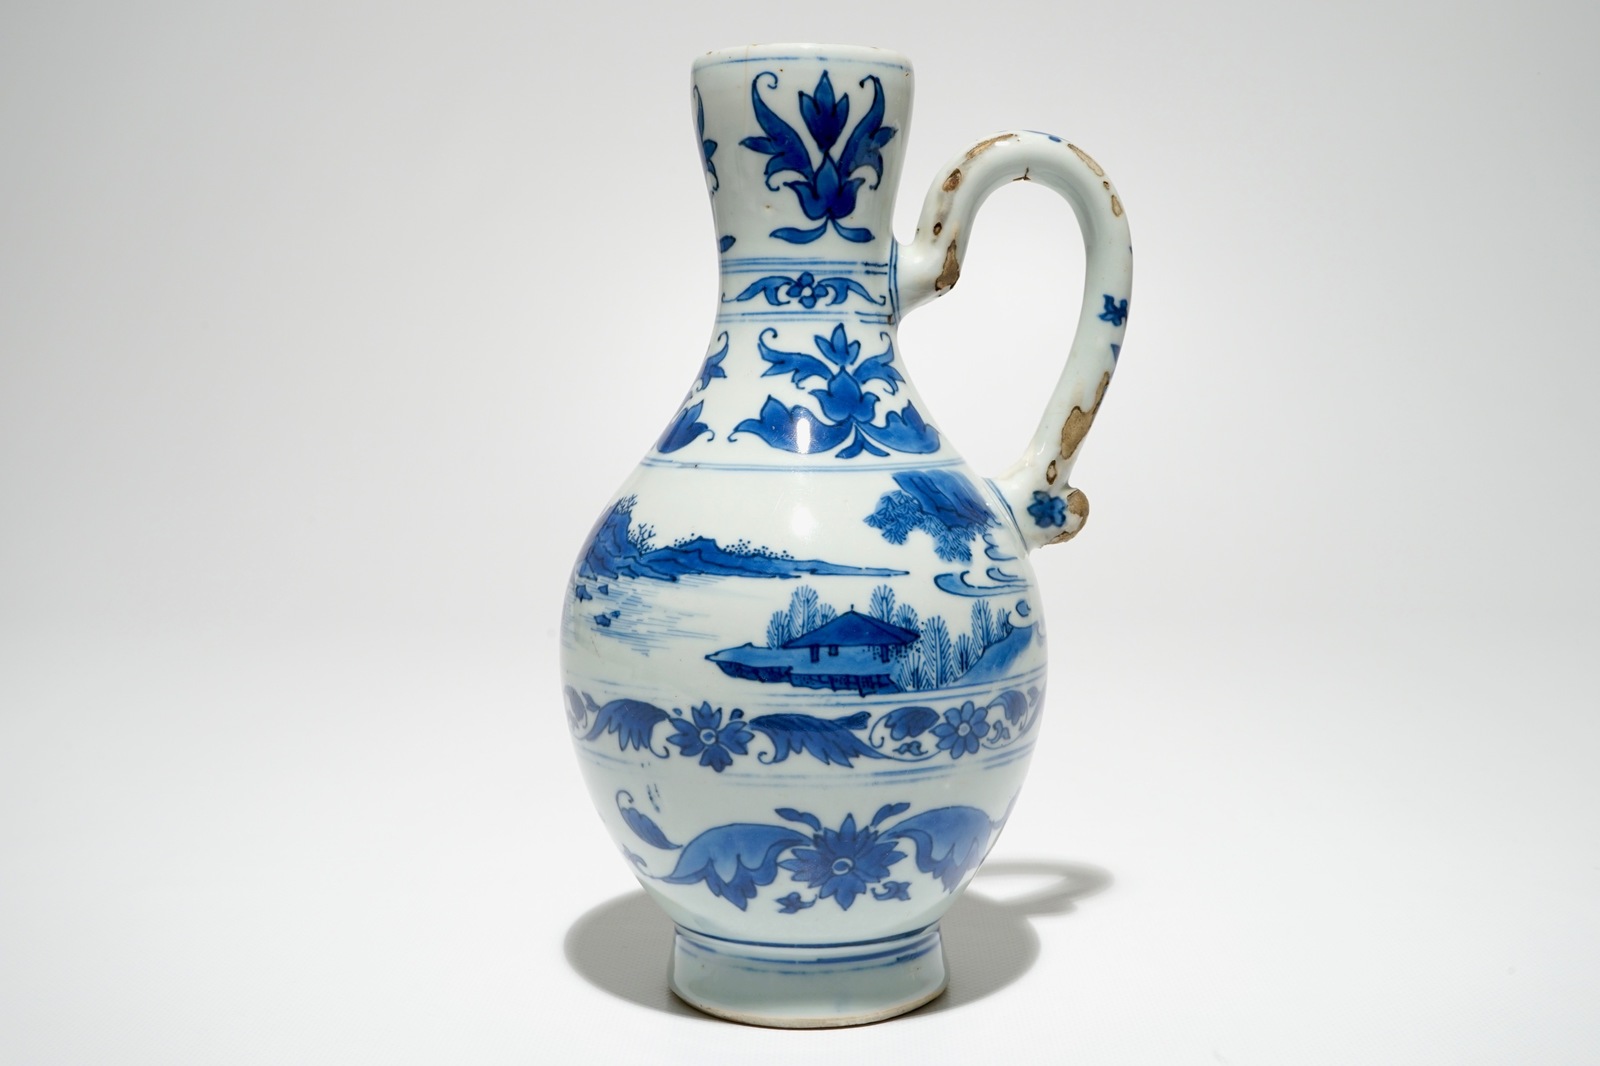 A Chinese blue and white jug with landscape design, Transitional period, Chongzhen H.: 24 cm - Image 2 of 7